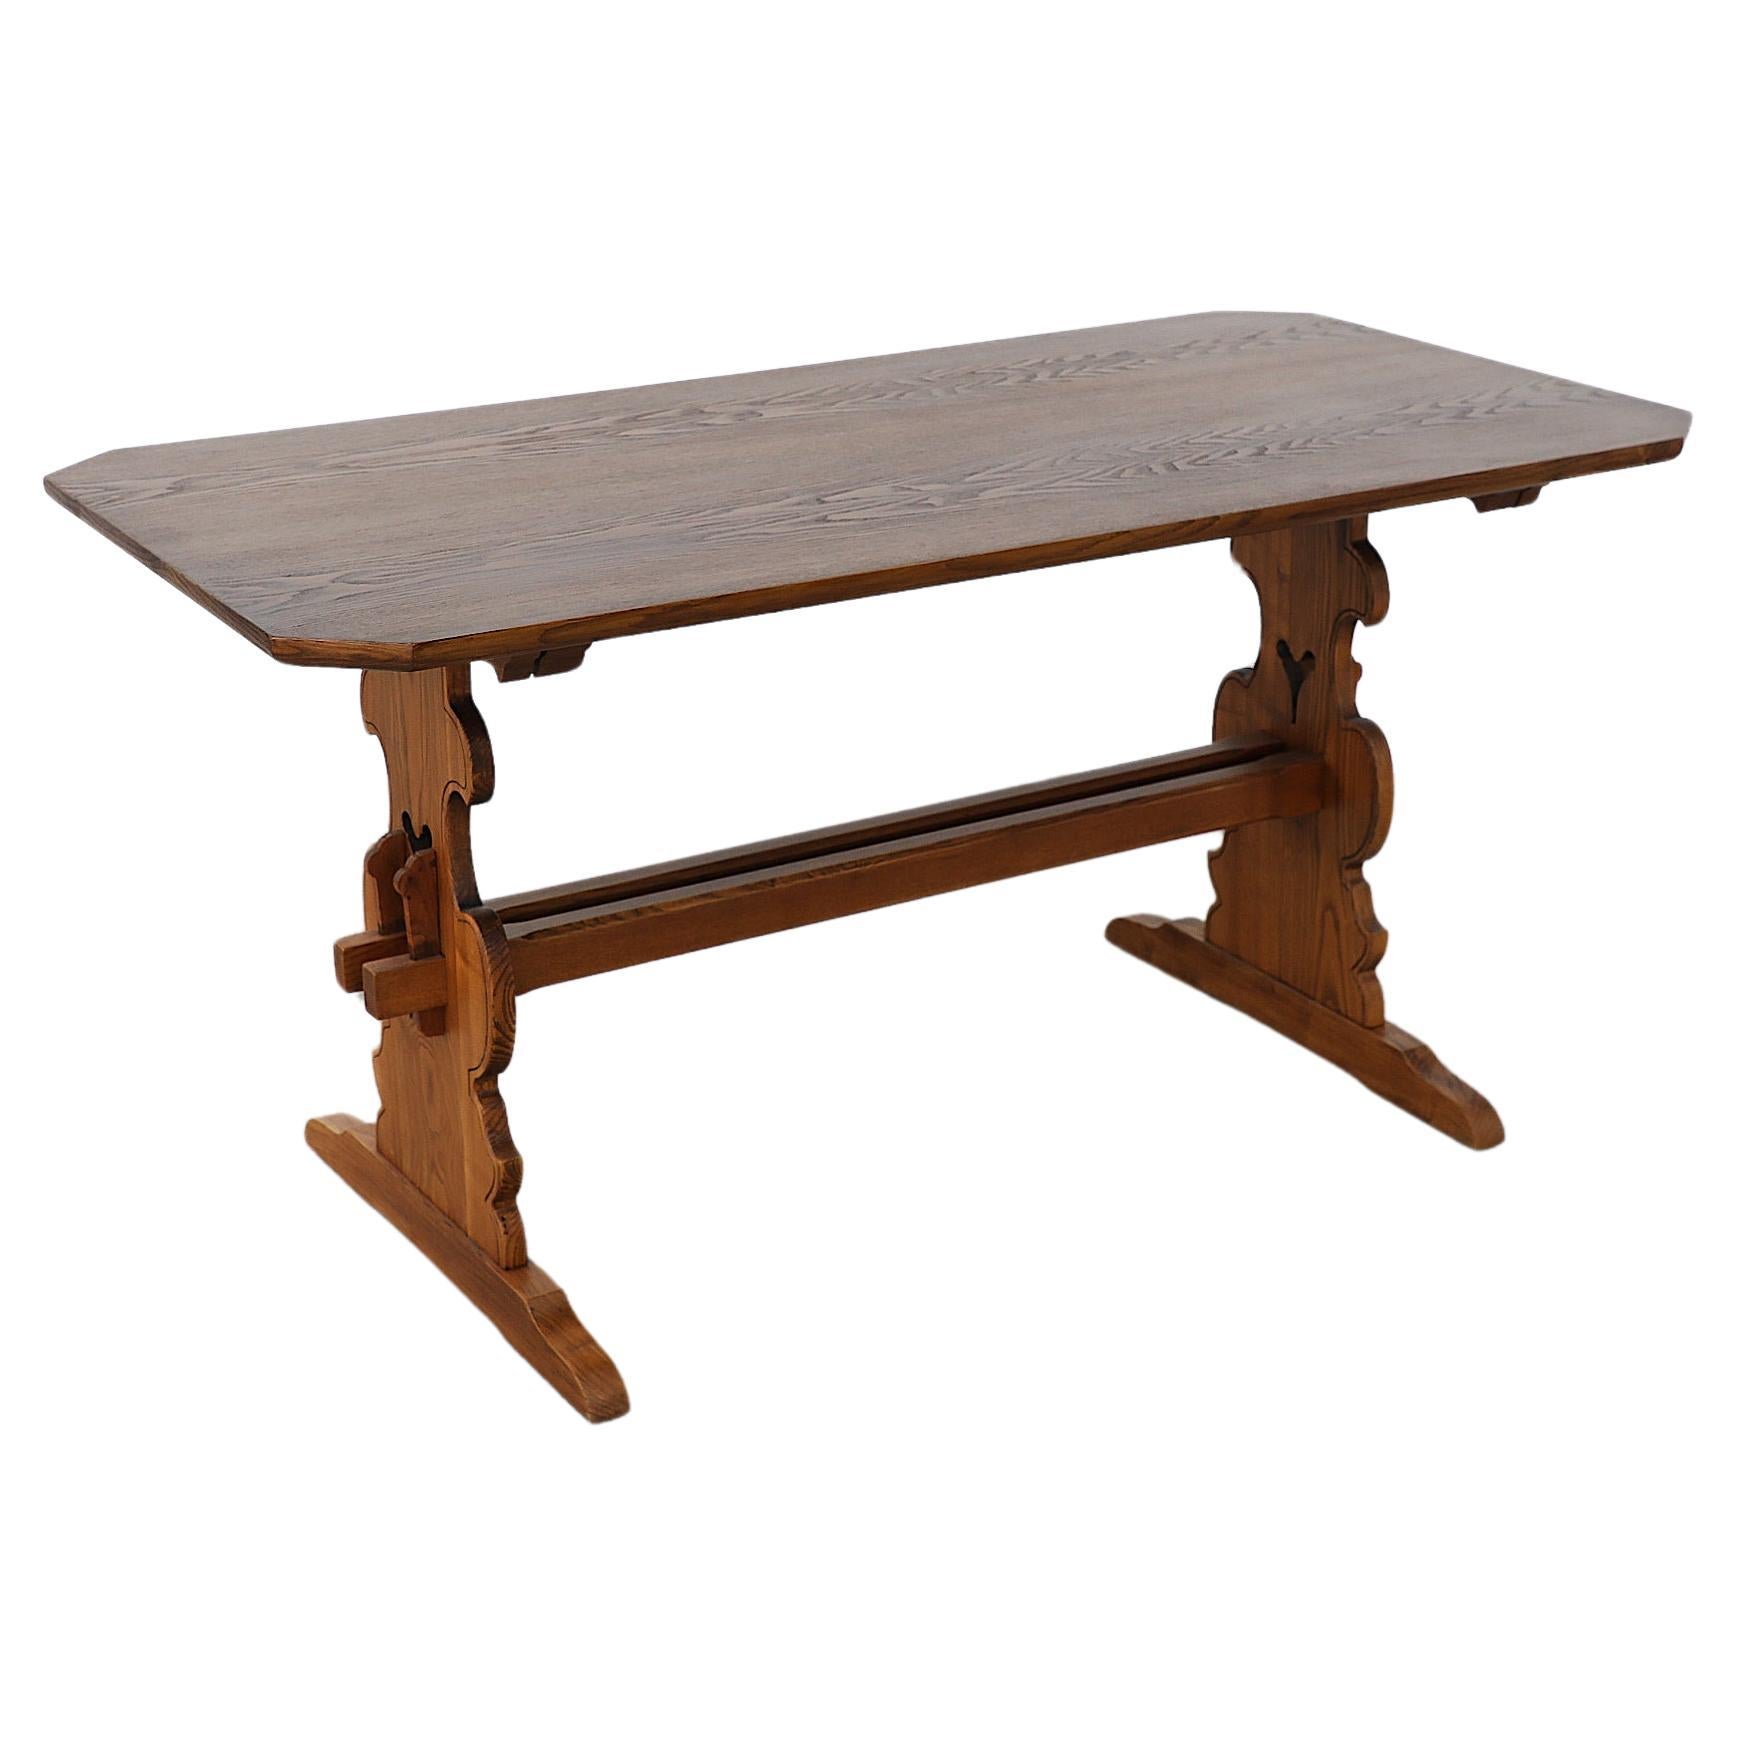 Austrian Ornate Brutalist Tyrolean Style Dark Pine Table with Angled Corners For Sale